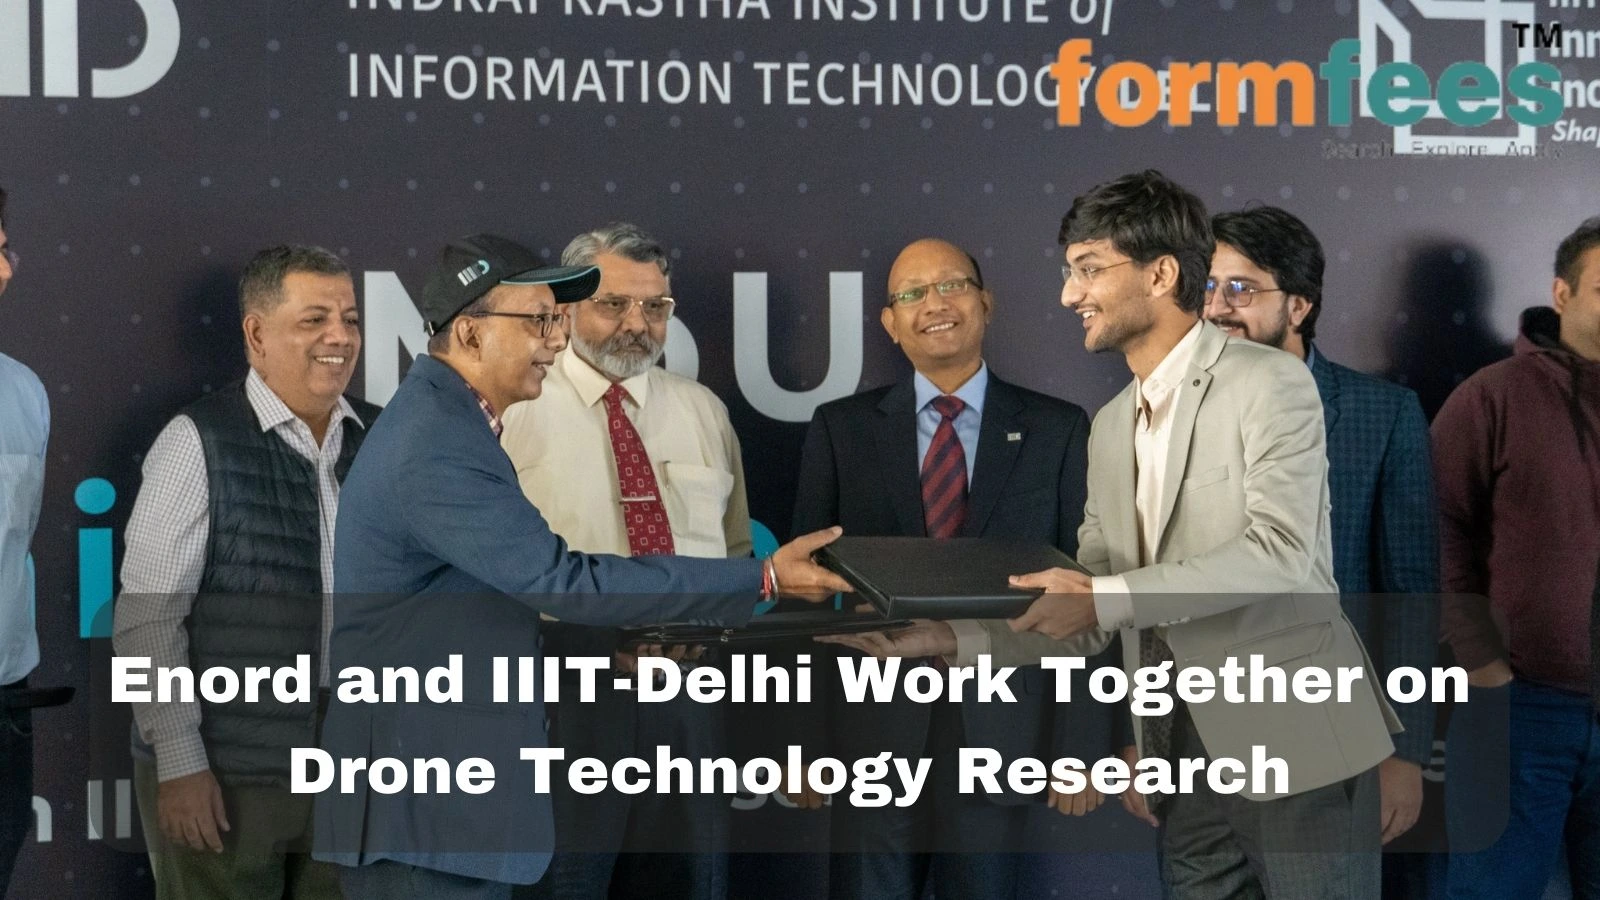 Enord and IIIT-Delhi Work Together on Drone Technology Research